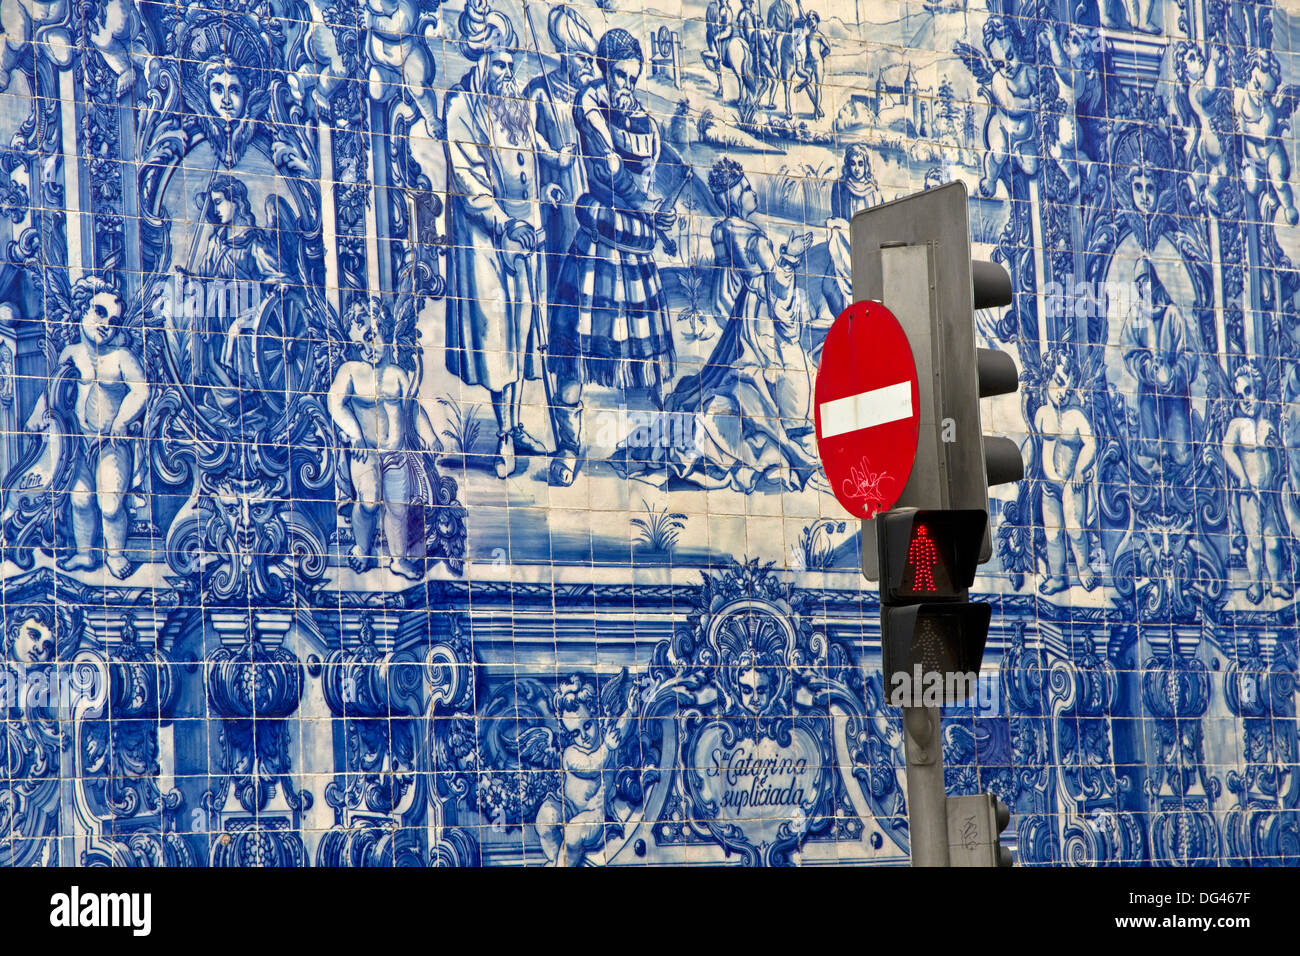 No entry sign in front of blue azulejo tiling covering wall of Capela das Almas, town centre, Porto, Portugal Stock Photo